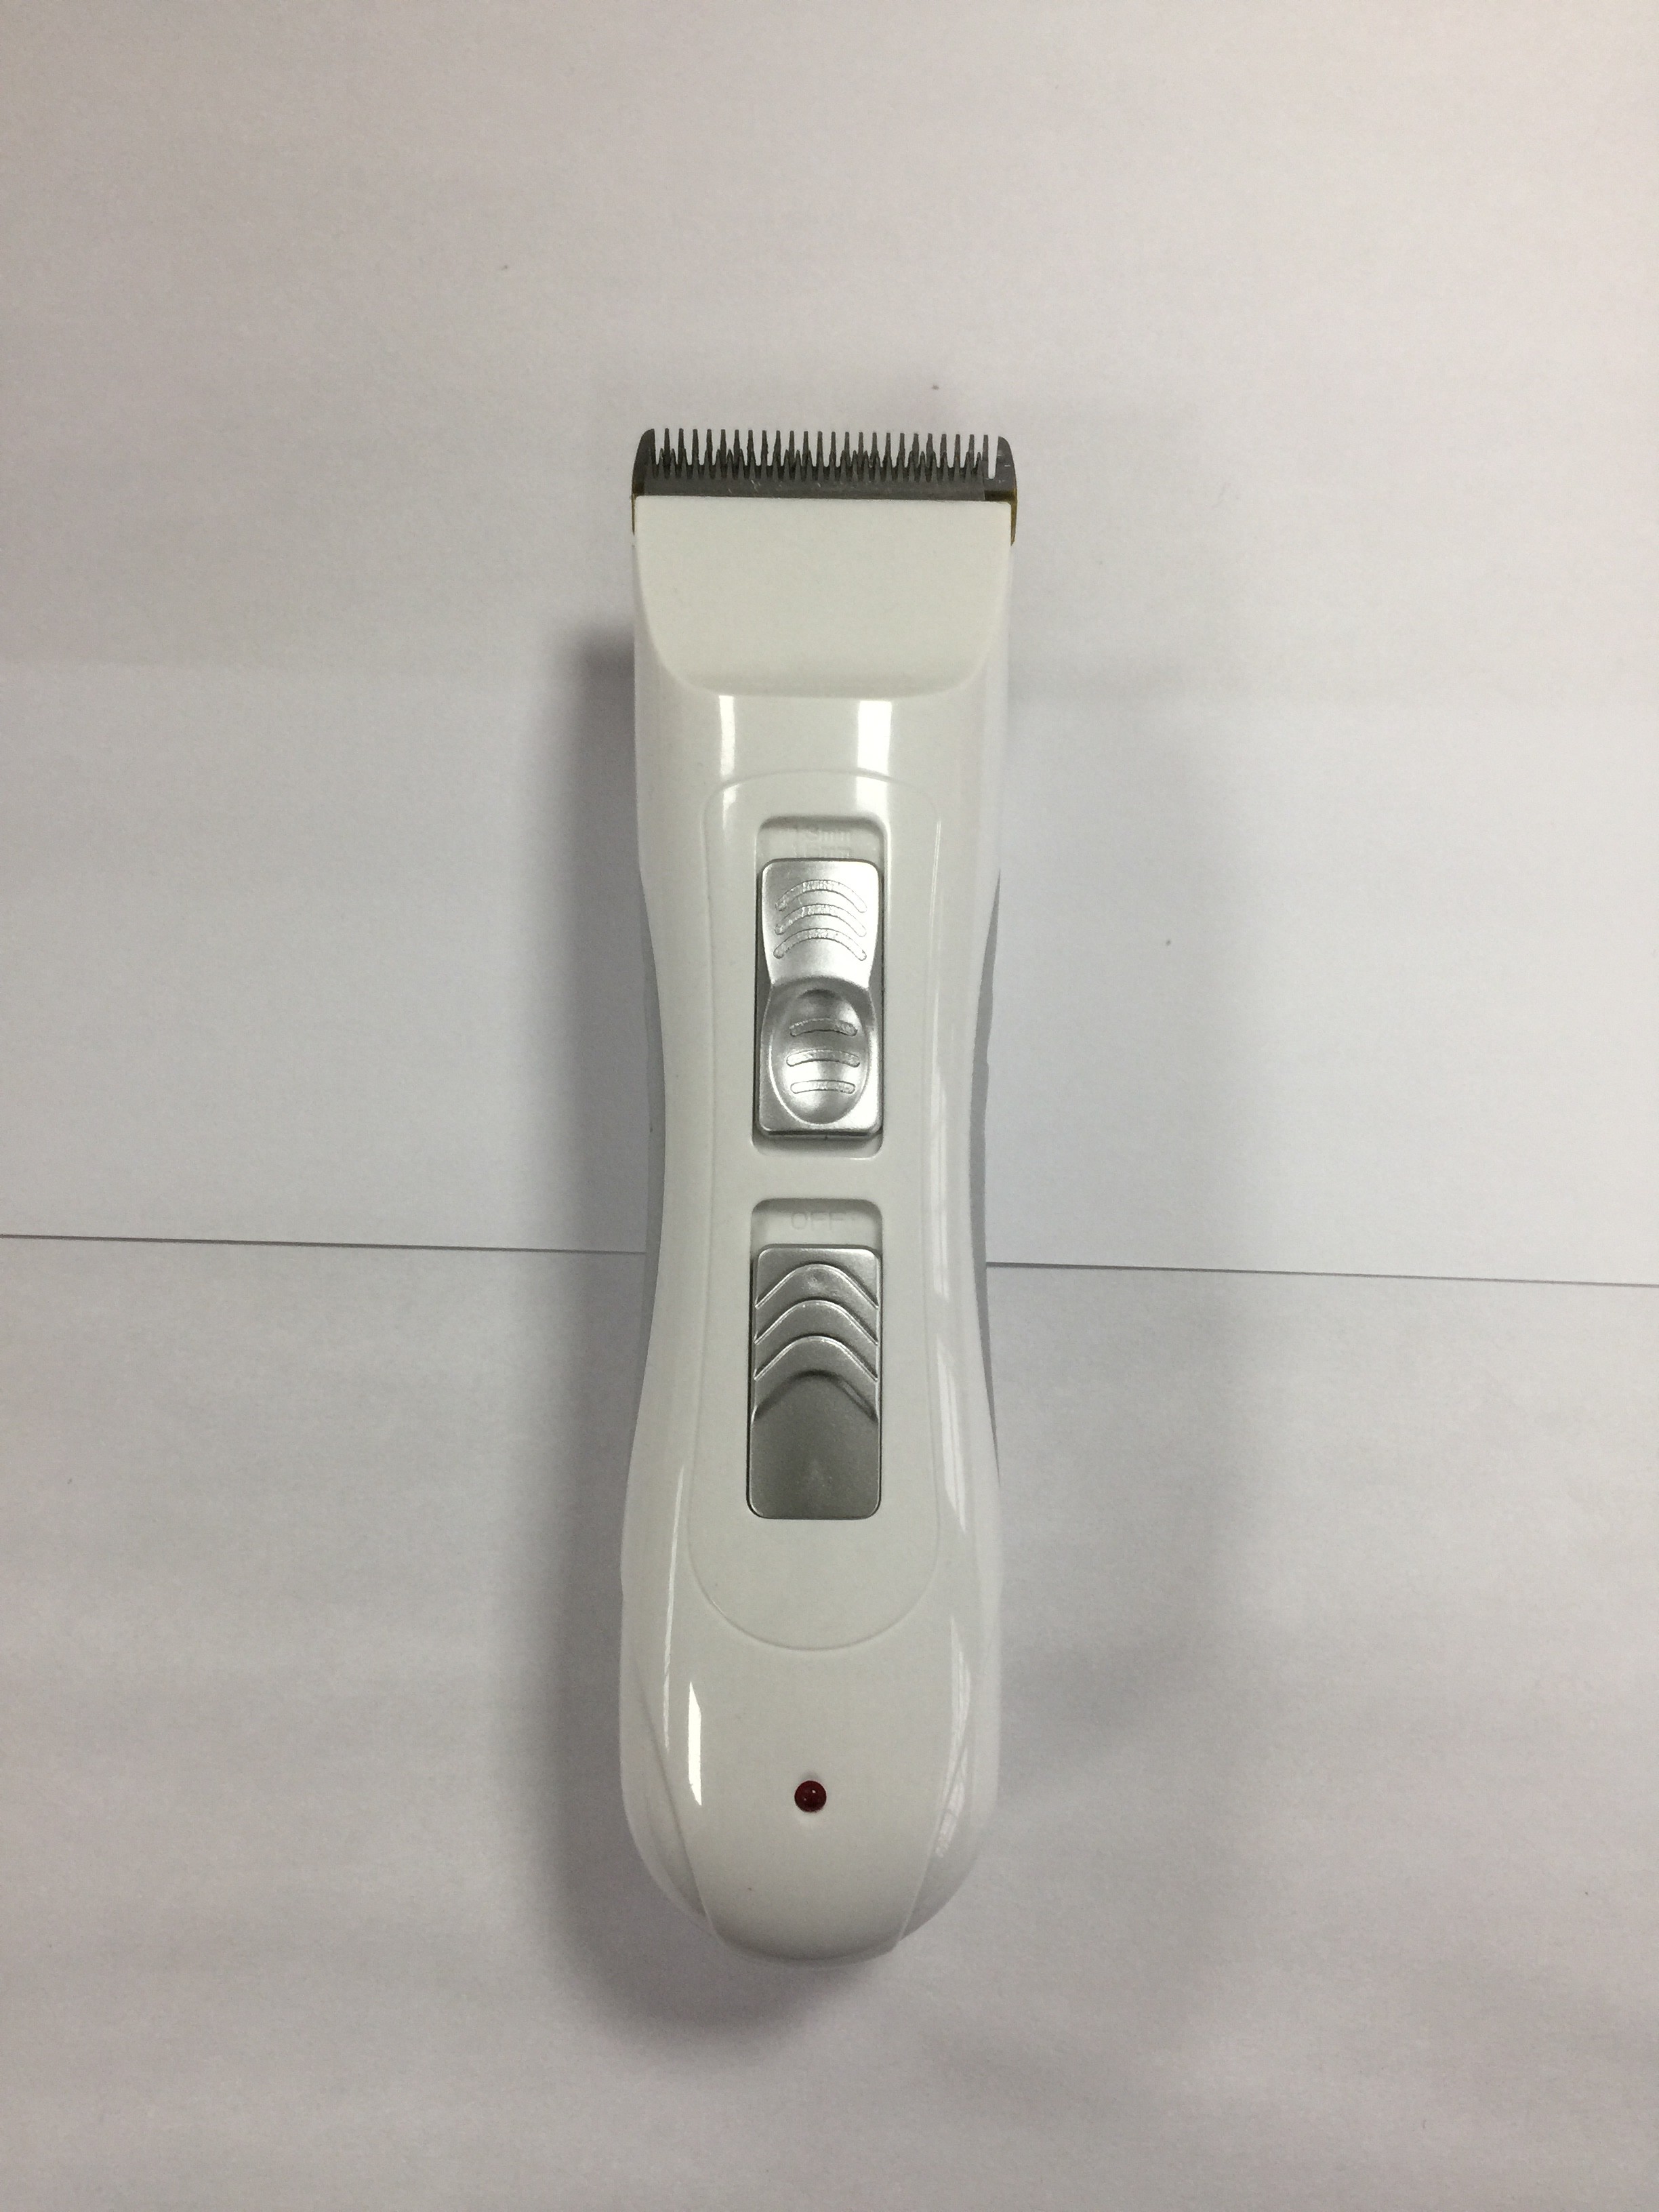 CE Approval Micro Rechargeable Home Hair Clipper With Cordless Gold Stainless Steel Blade